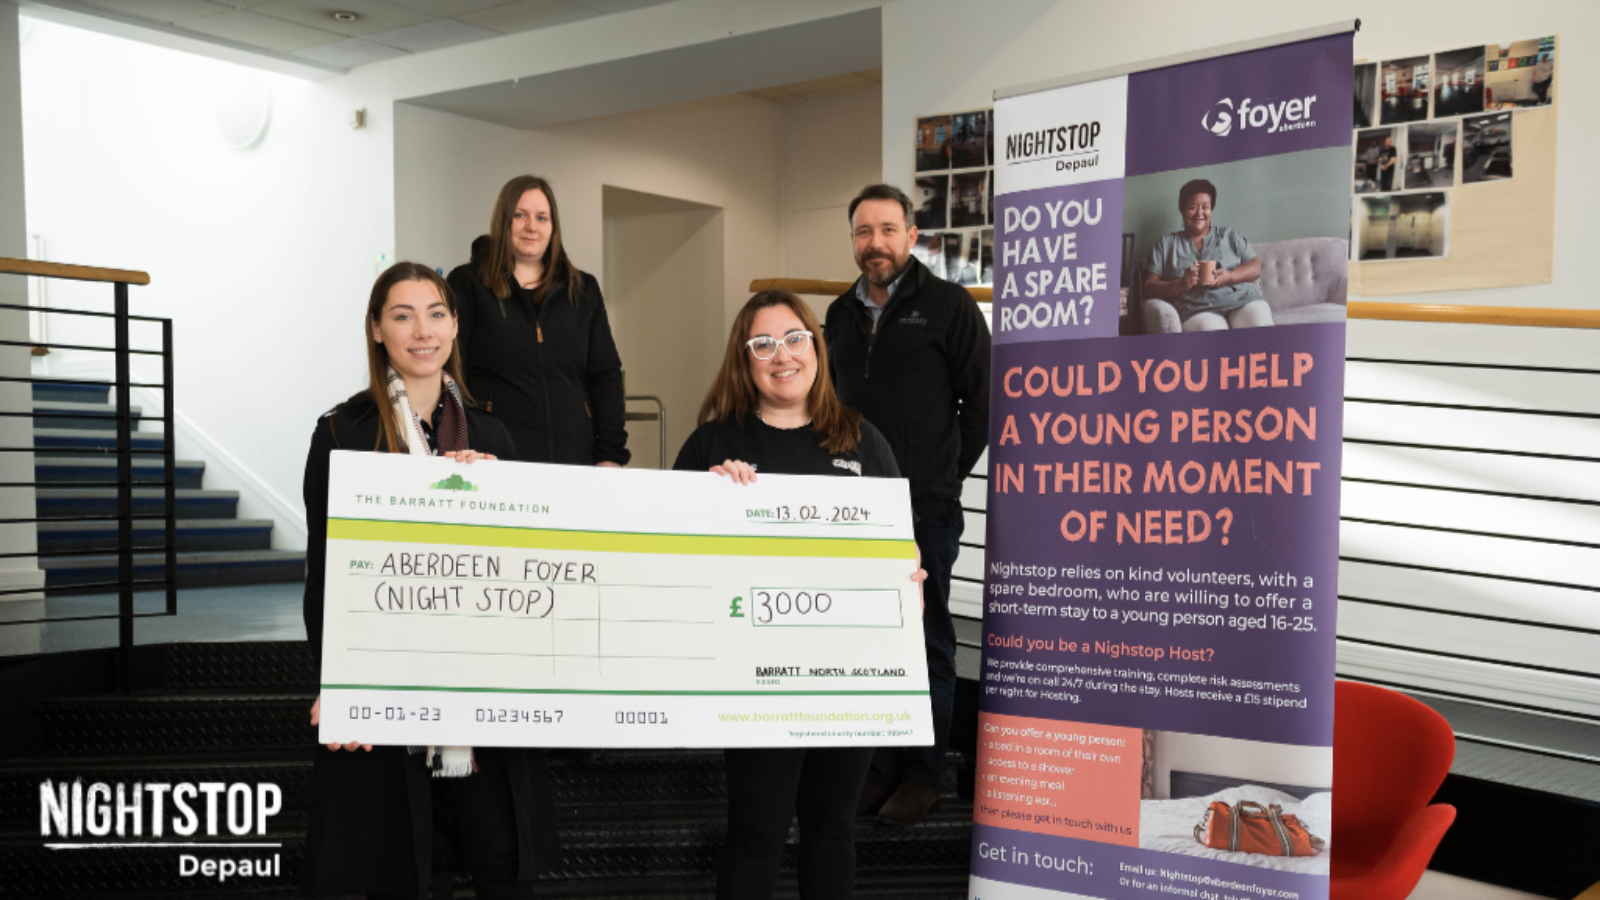 Aberdeen Foyer thanks Barratt Homes for generous donation to Nightstop project